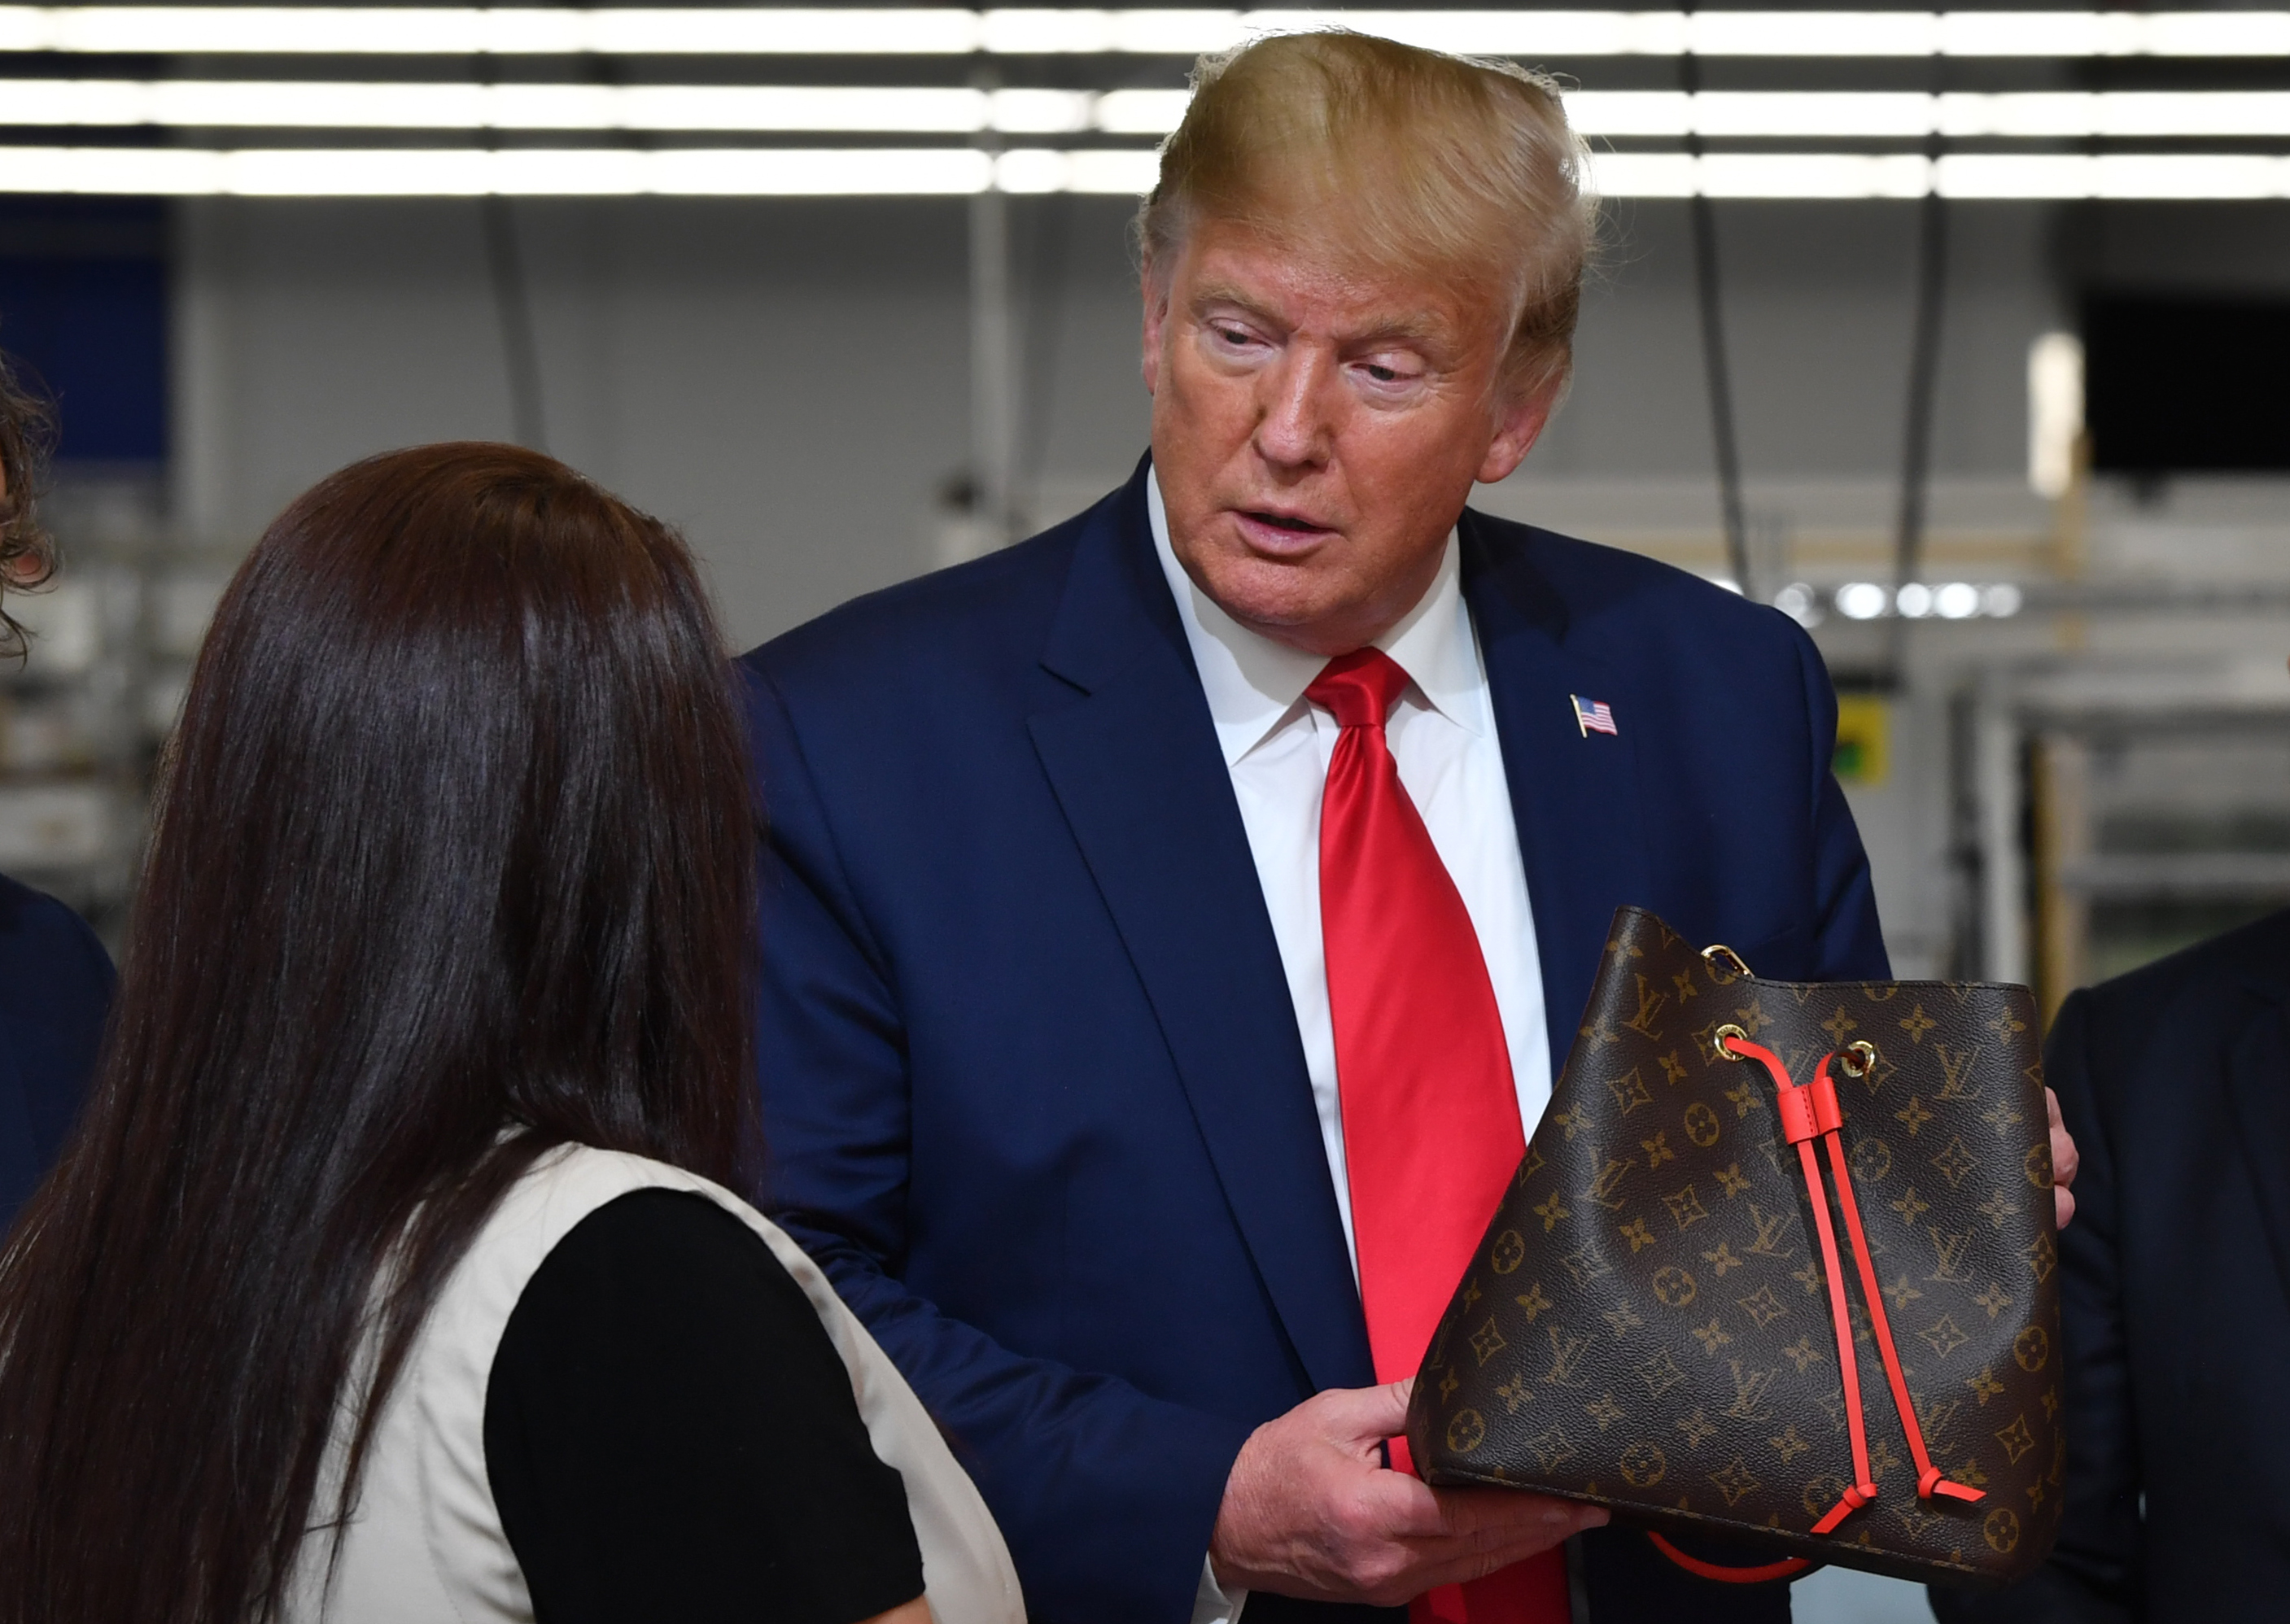 President Donald Trump visits Louis Vuitton factory in Texas before  campaign rally